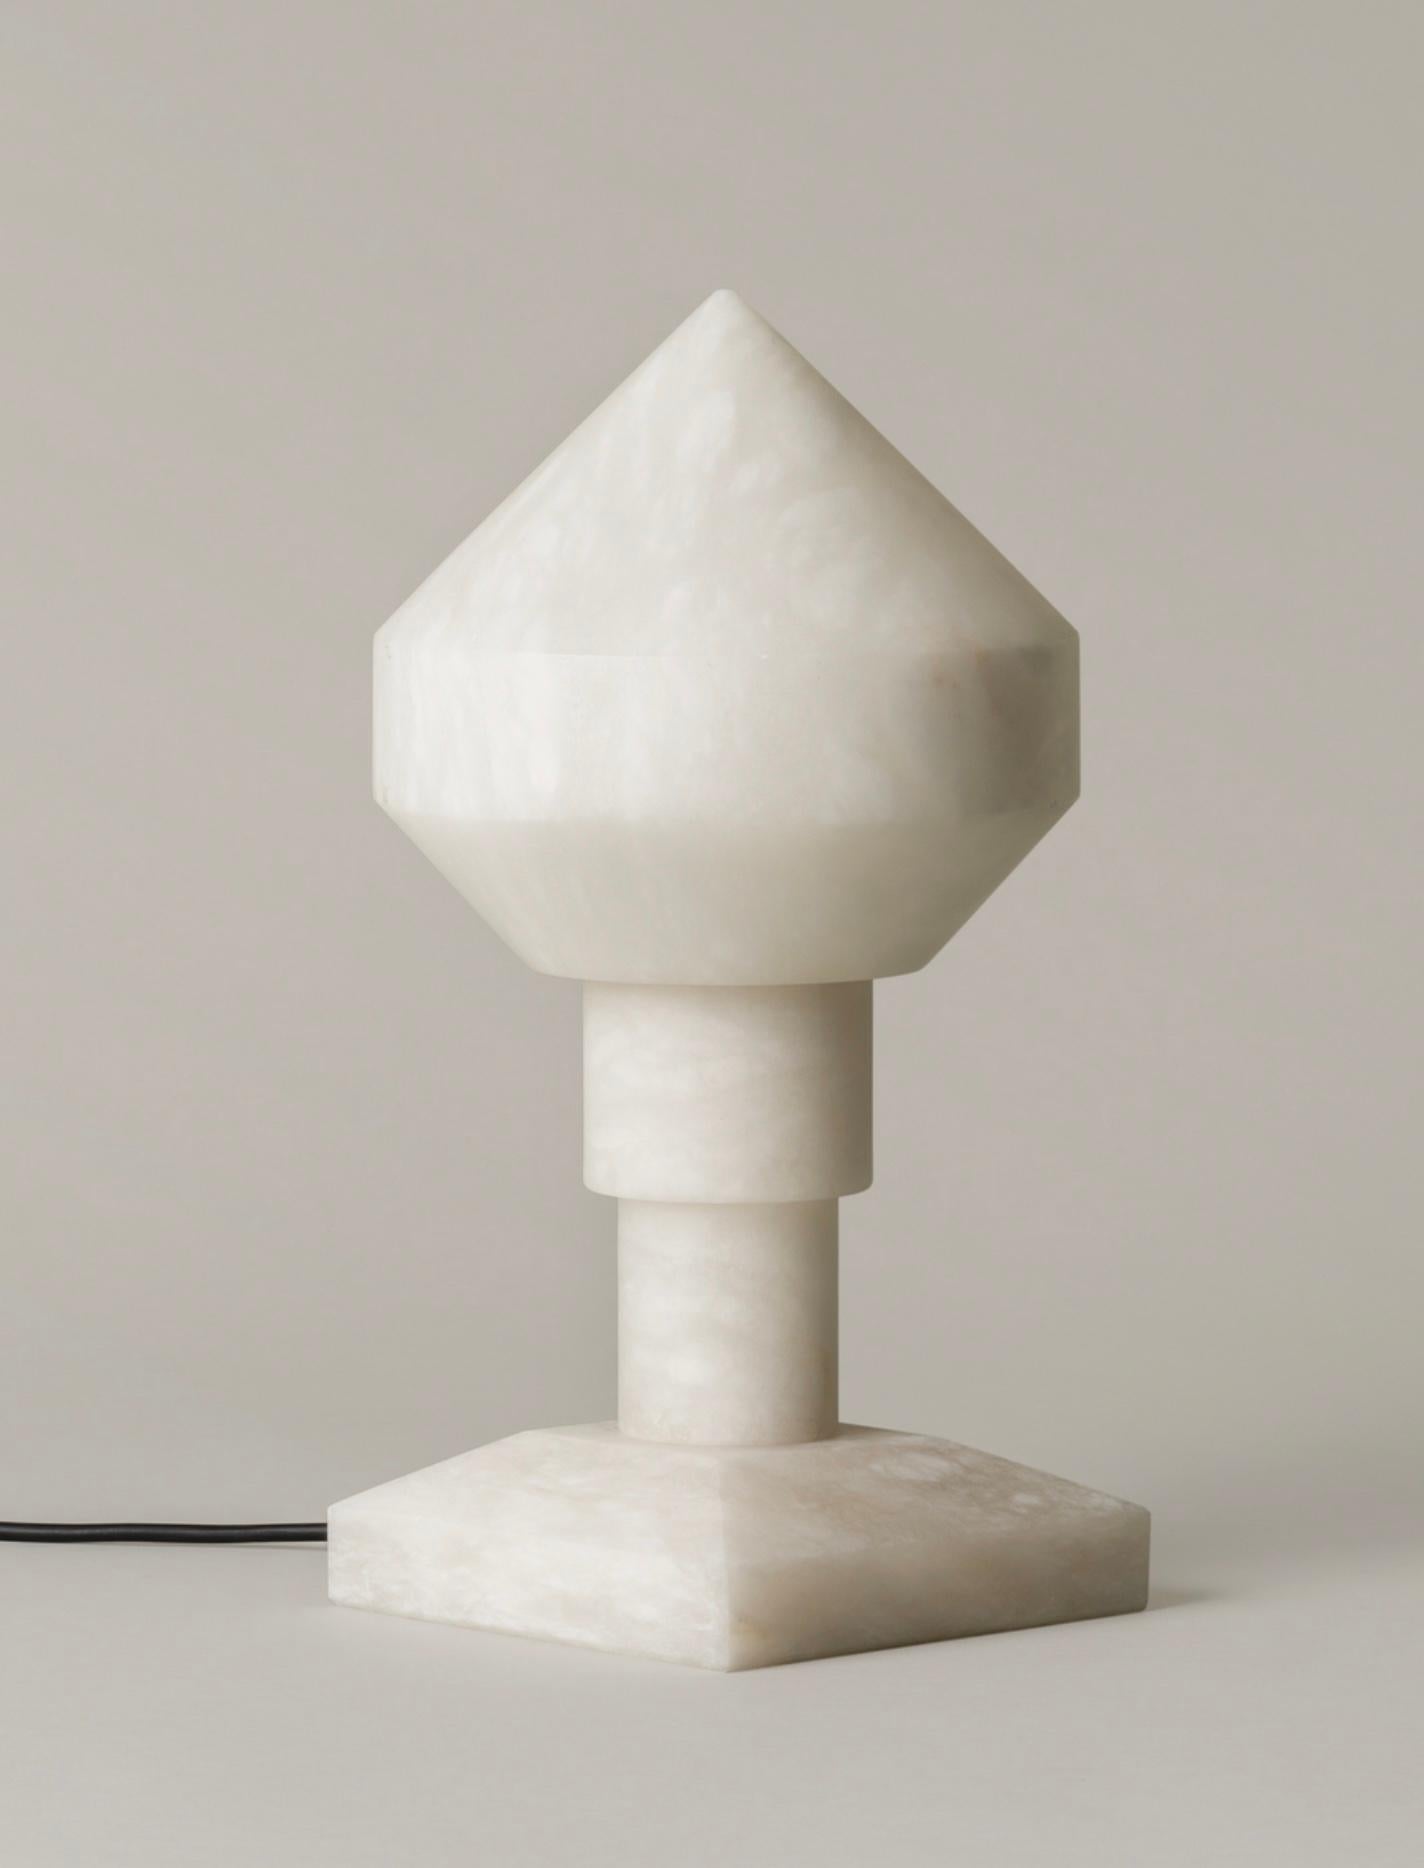 Zeleste table lamp by Àngel Jové and Santiago Roqueta for Santa & Cole. Originally designed in Spain, 1969. Current production available from rewire gallery. Carved, solid, white alabaster, the Zeleste is reminiscent of Barcelona’s night life, with